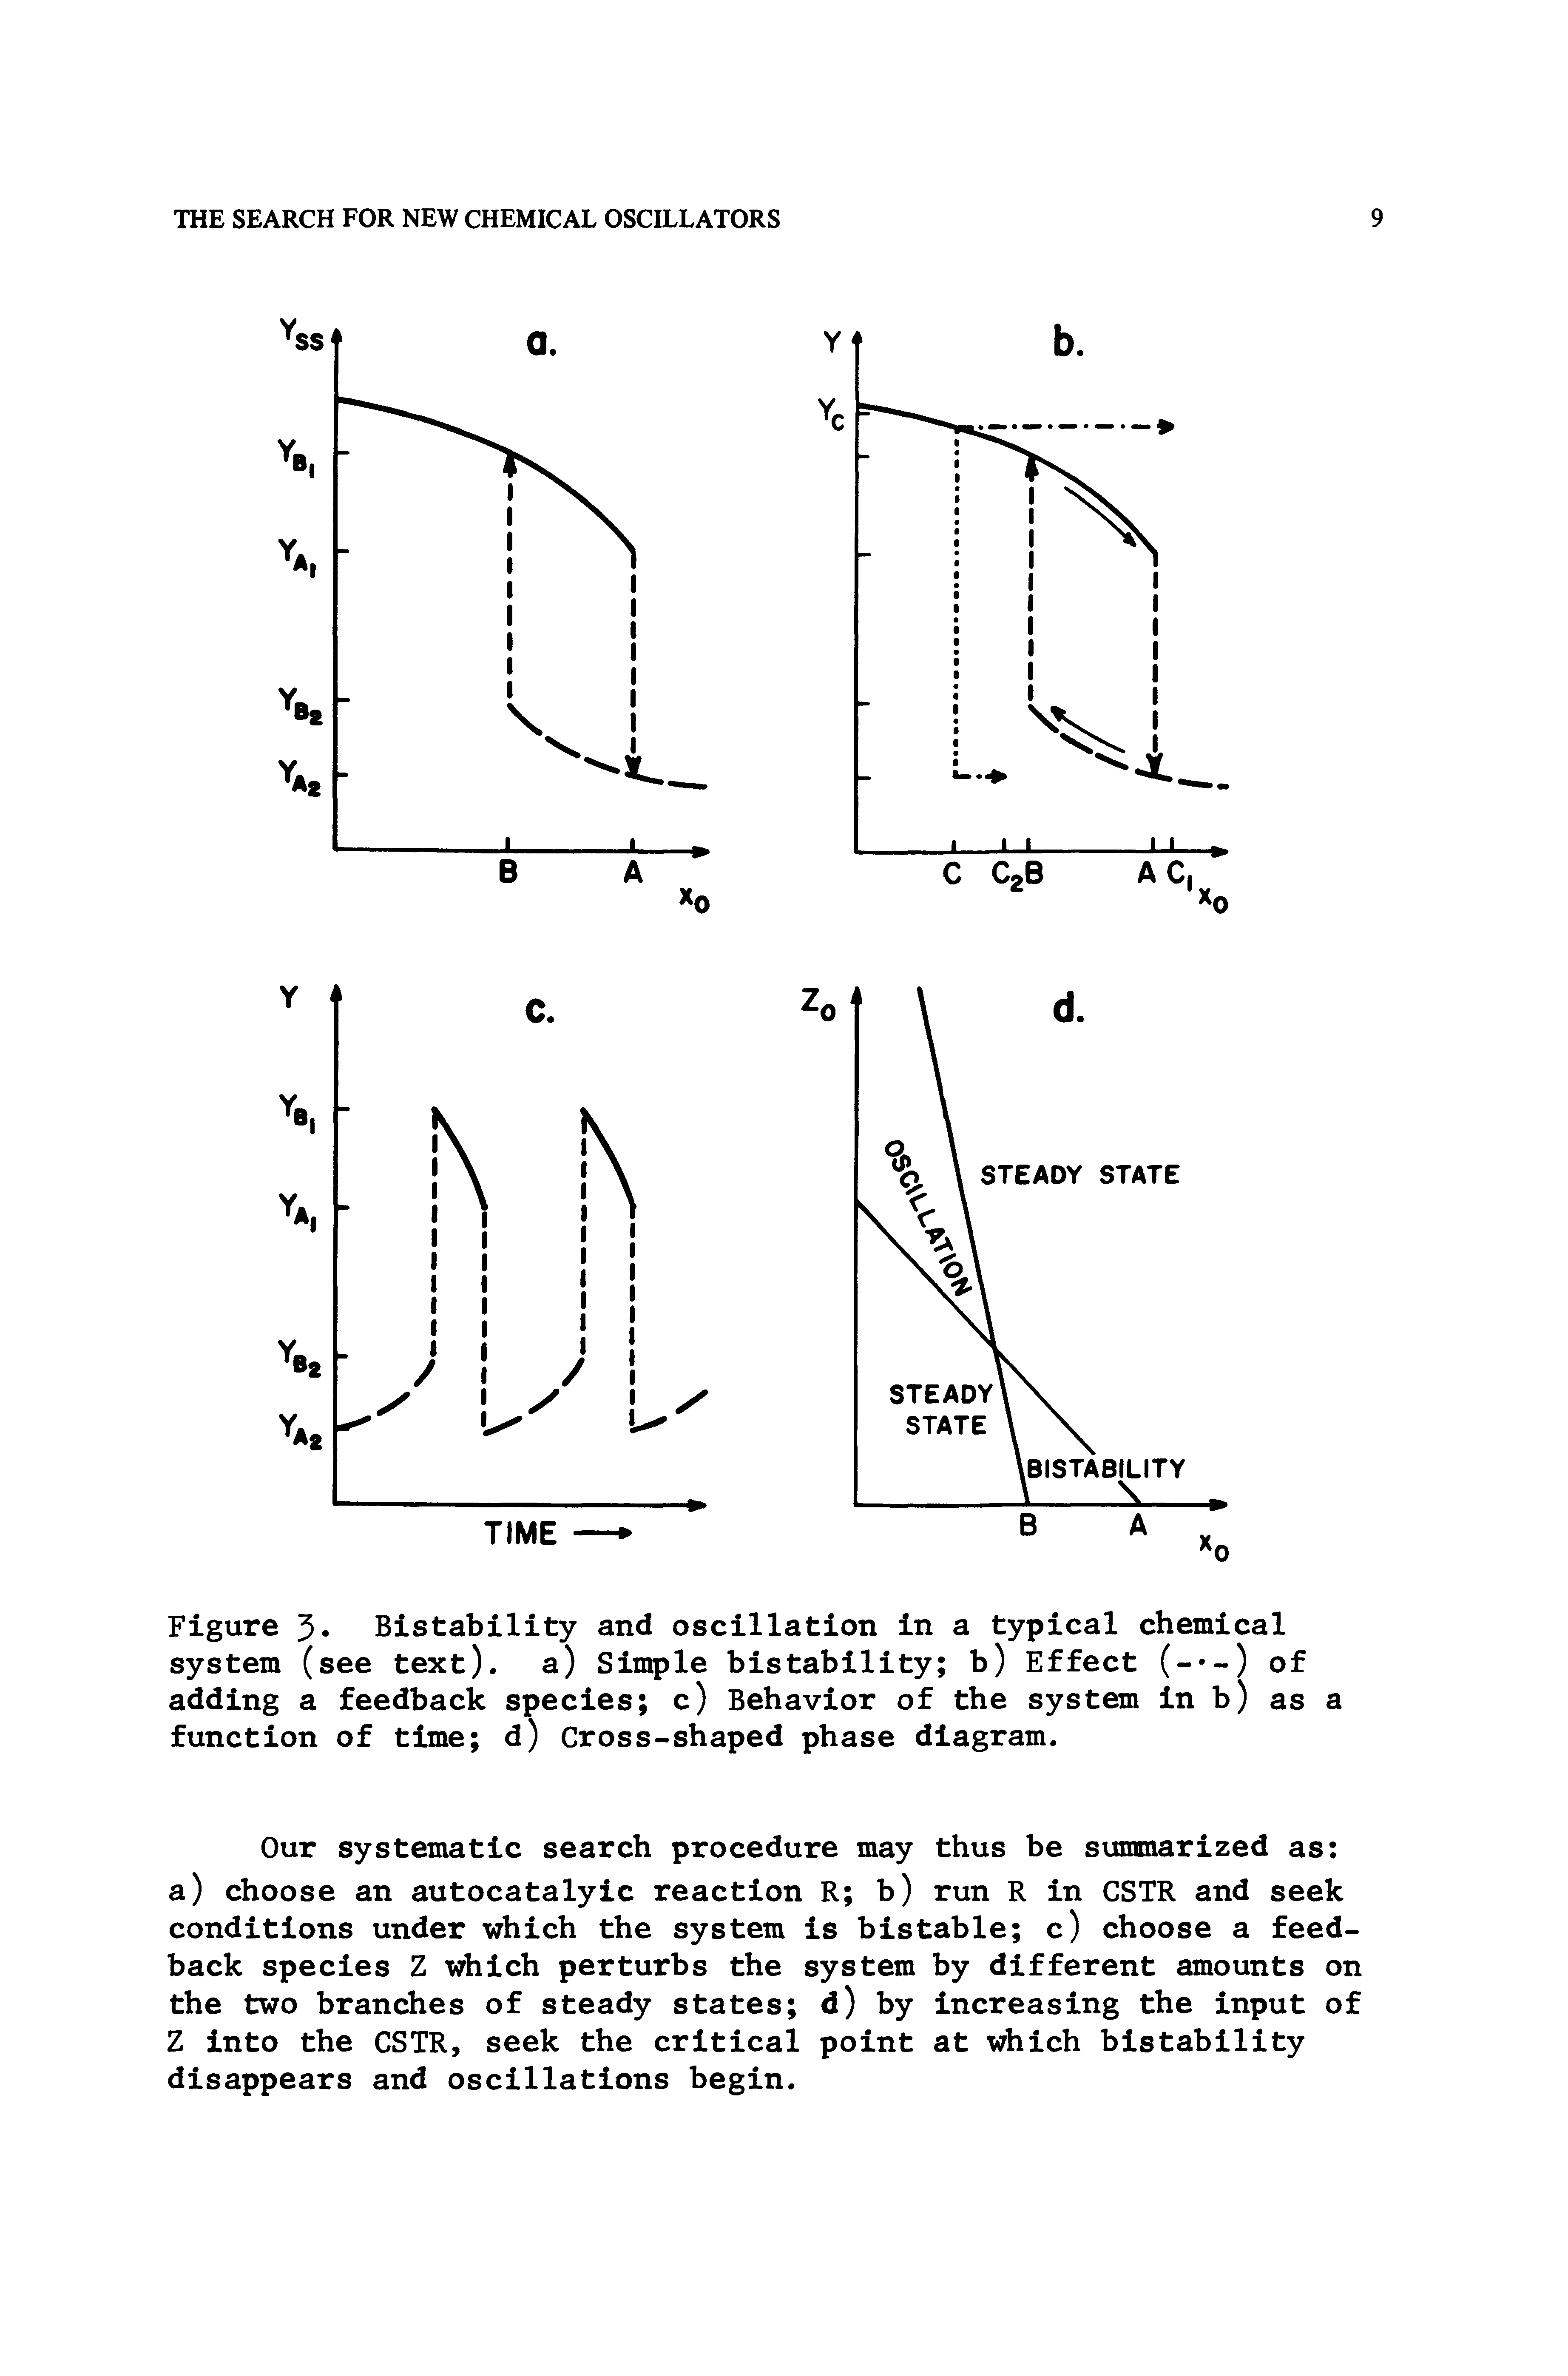 Figure 5- Bistability and oscillation in a typical chemical system (see text), a) Simple bistability b) Effect (- -) of adding a feedback species c) Behavior of the system in b) as function of time d) Cross-shaped phase diagram.